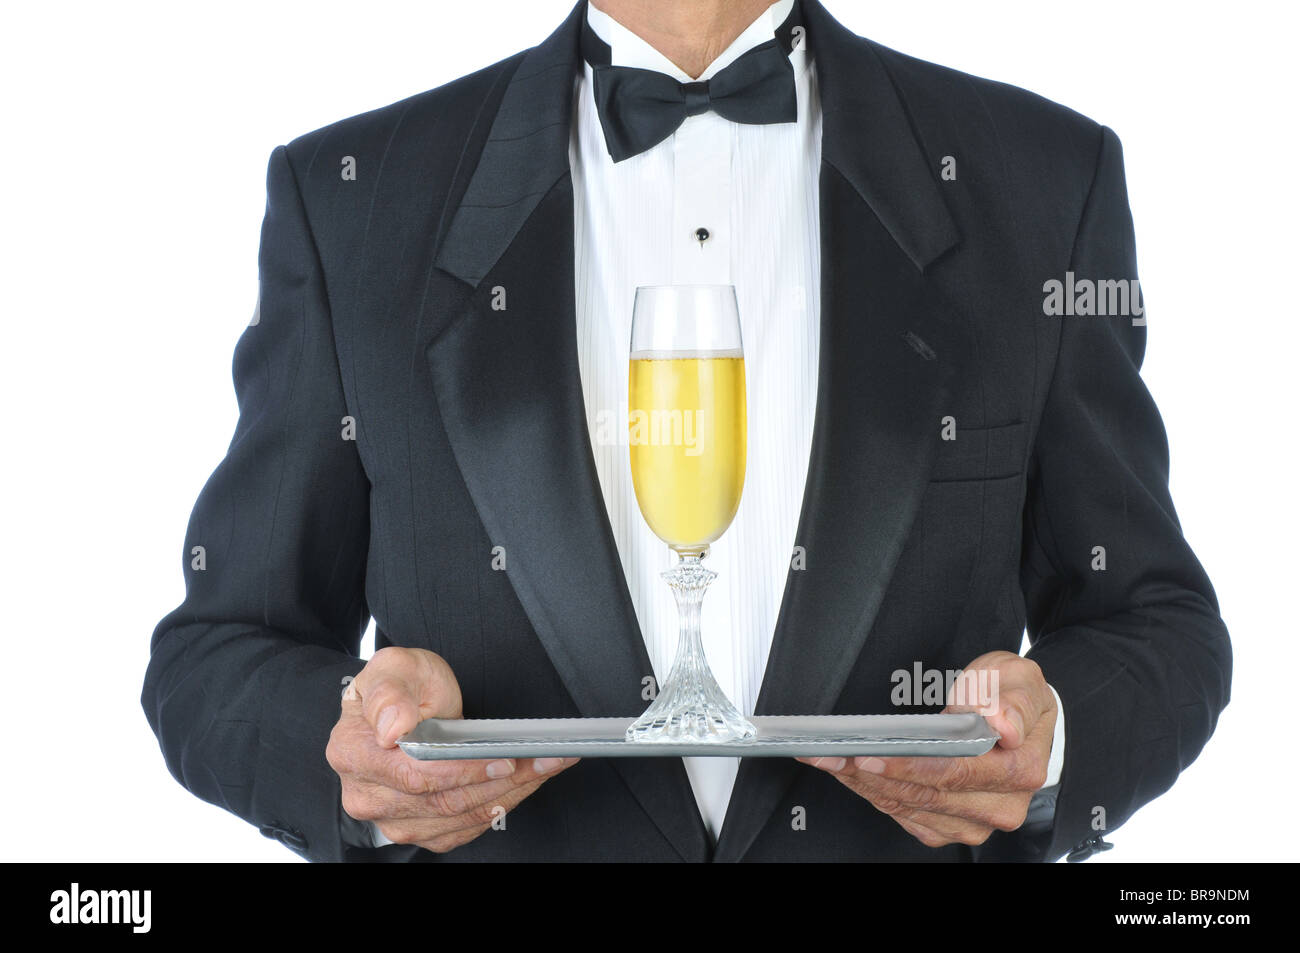 Man in Tuxedo Champagne Flute on Tray. Stock Photo